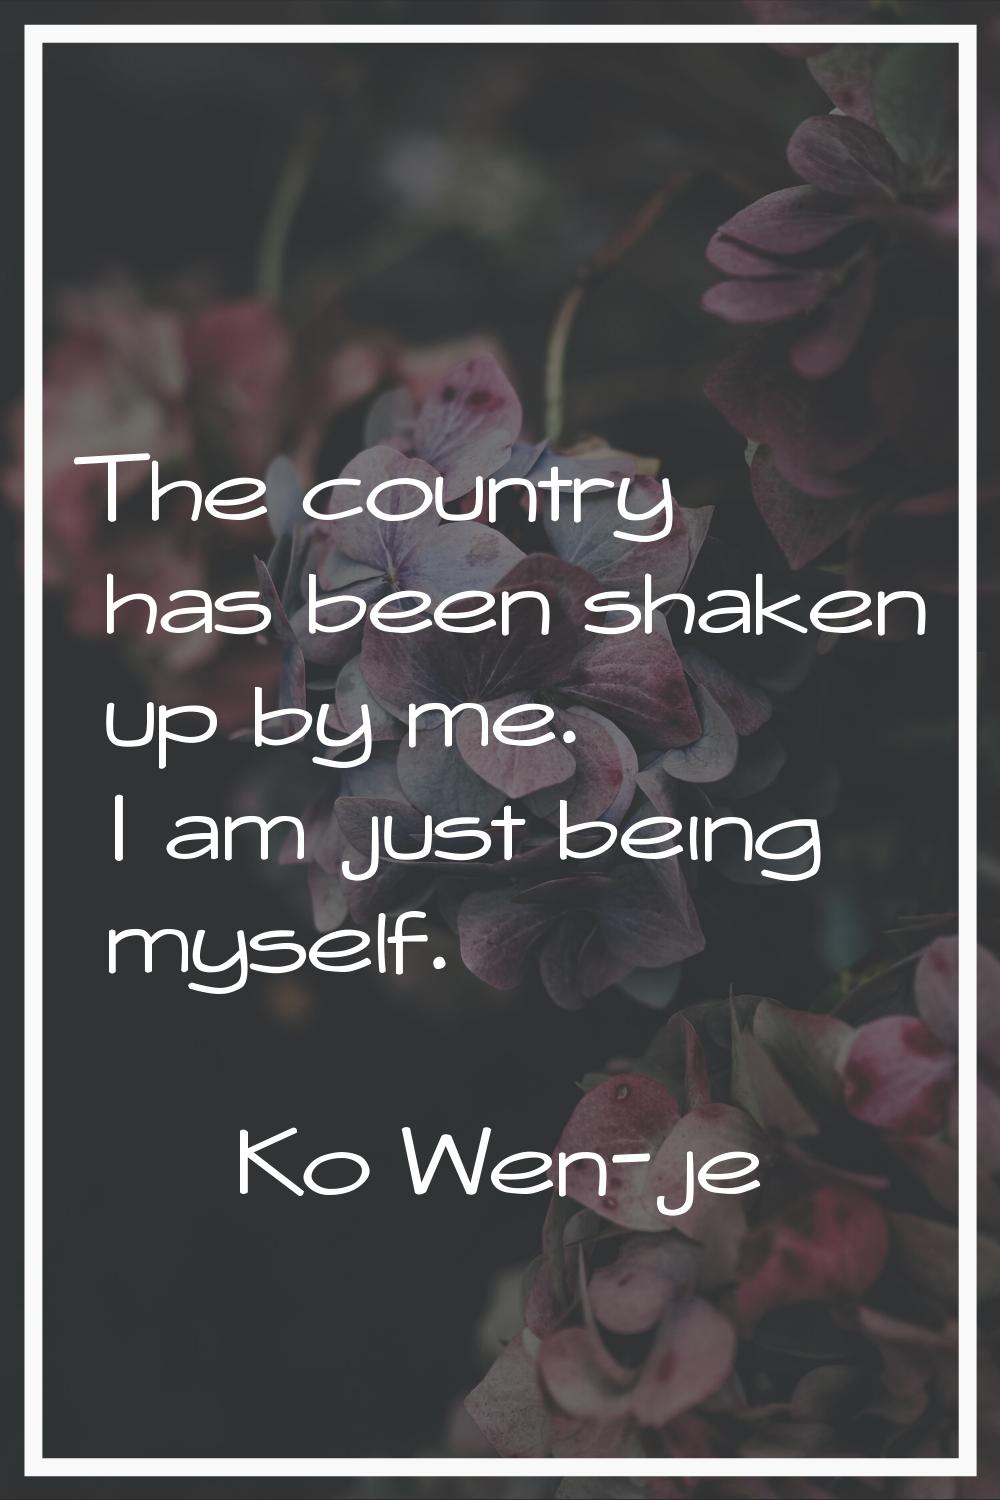 The country has been shaken up by me. I am just being myself.